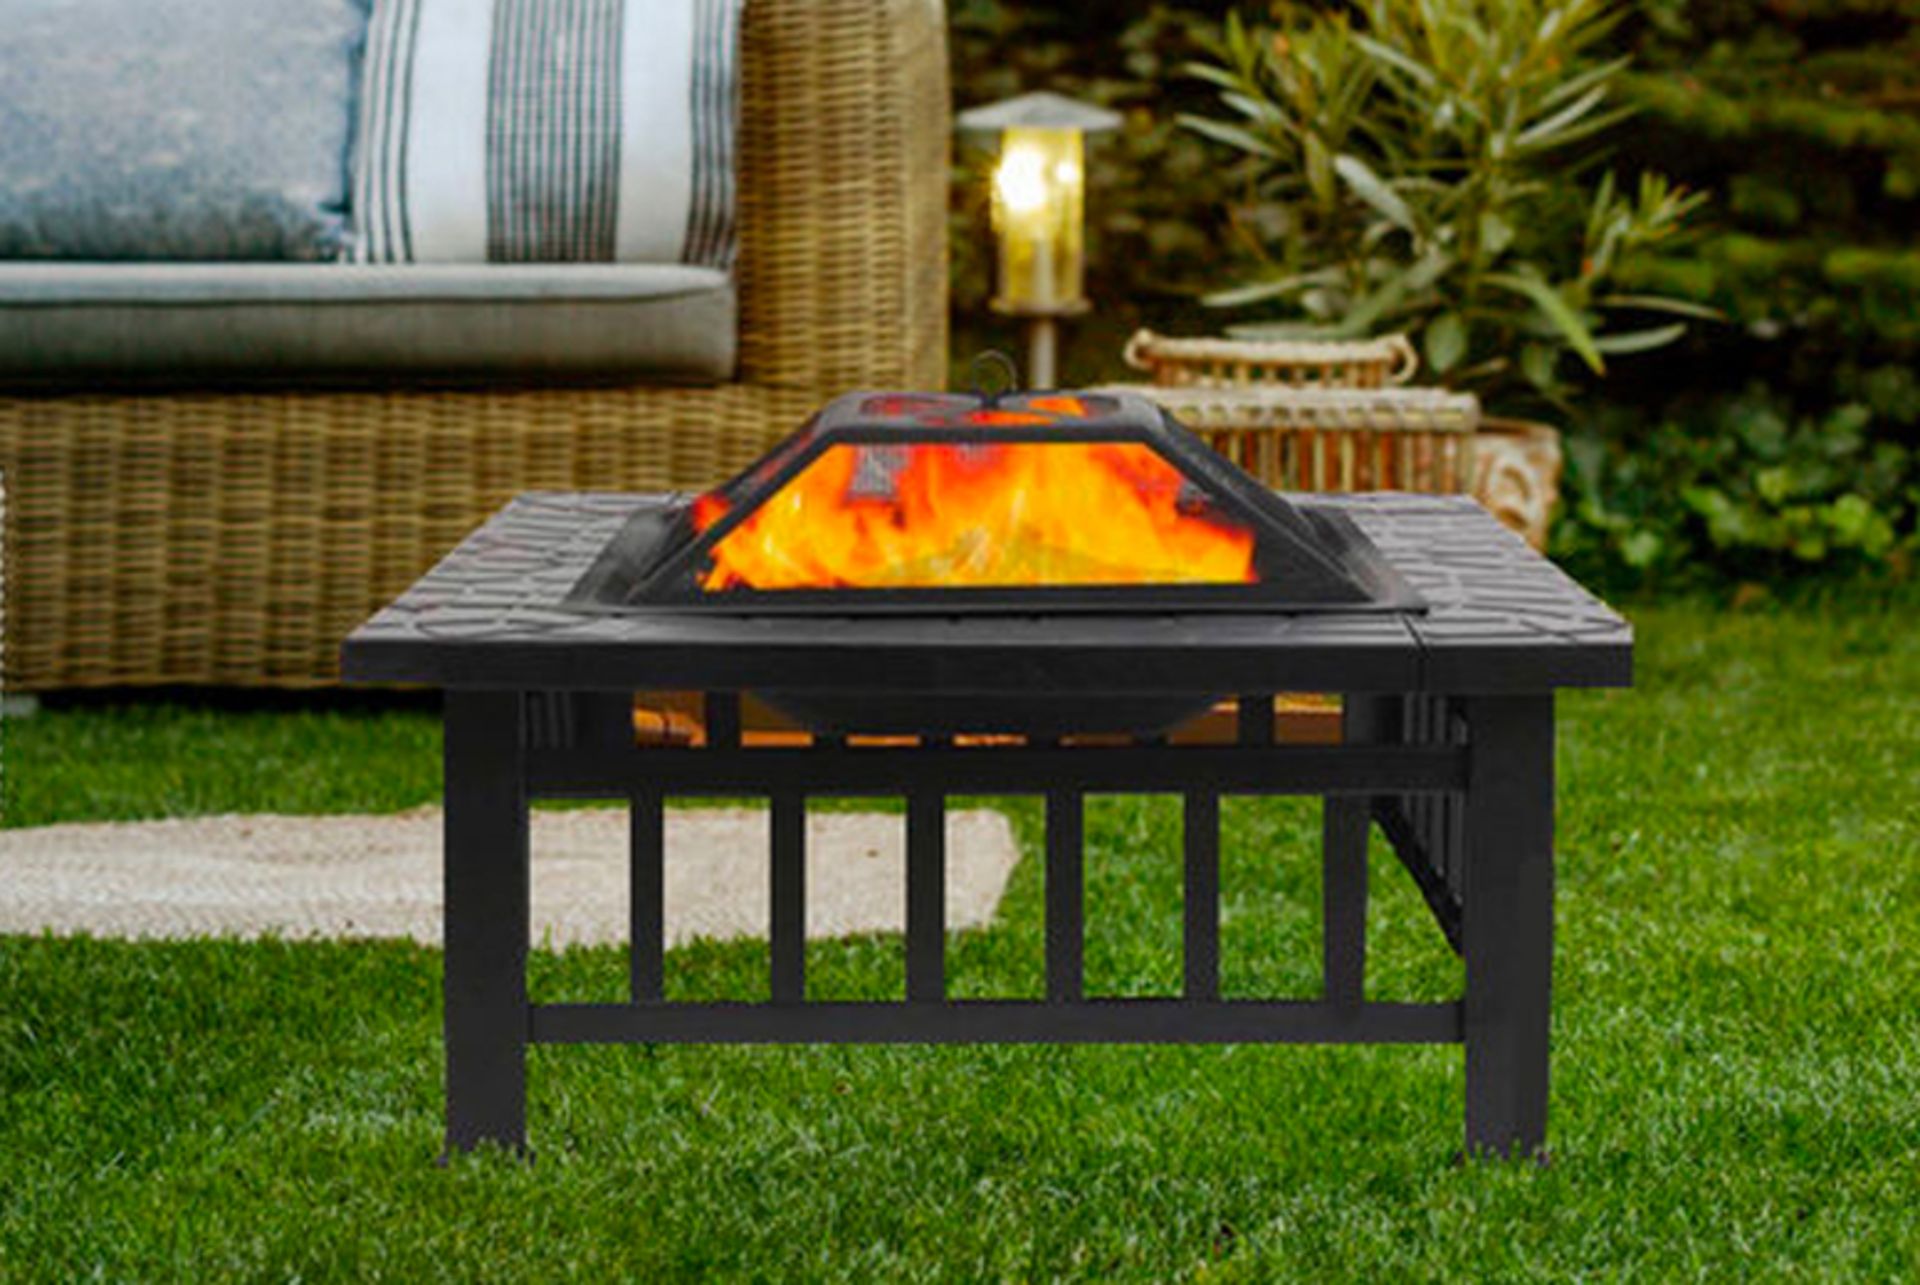 JOBLOT OF 10 X 3-IN-1 LARGE SQUARE FIRE PIT - Image 2 of 2